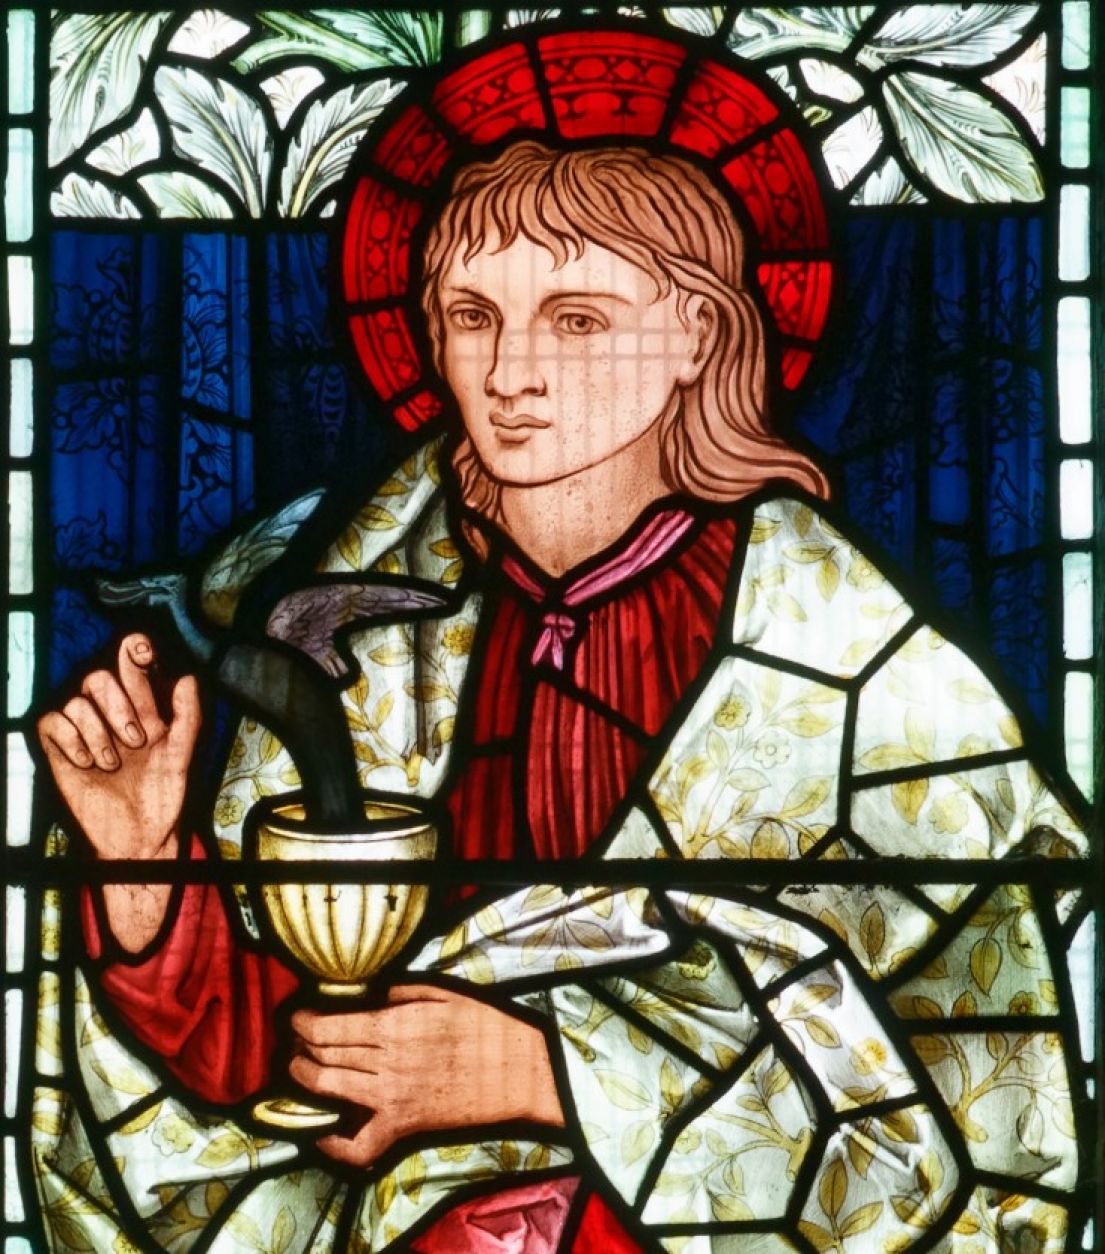 A stained glass window of a Saint, with a dragon immerging from a gold chalice.